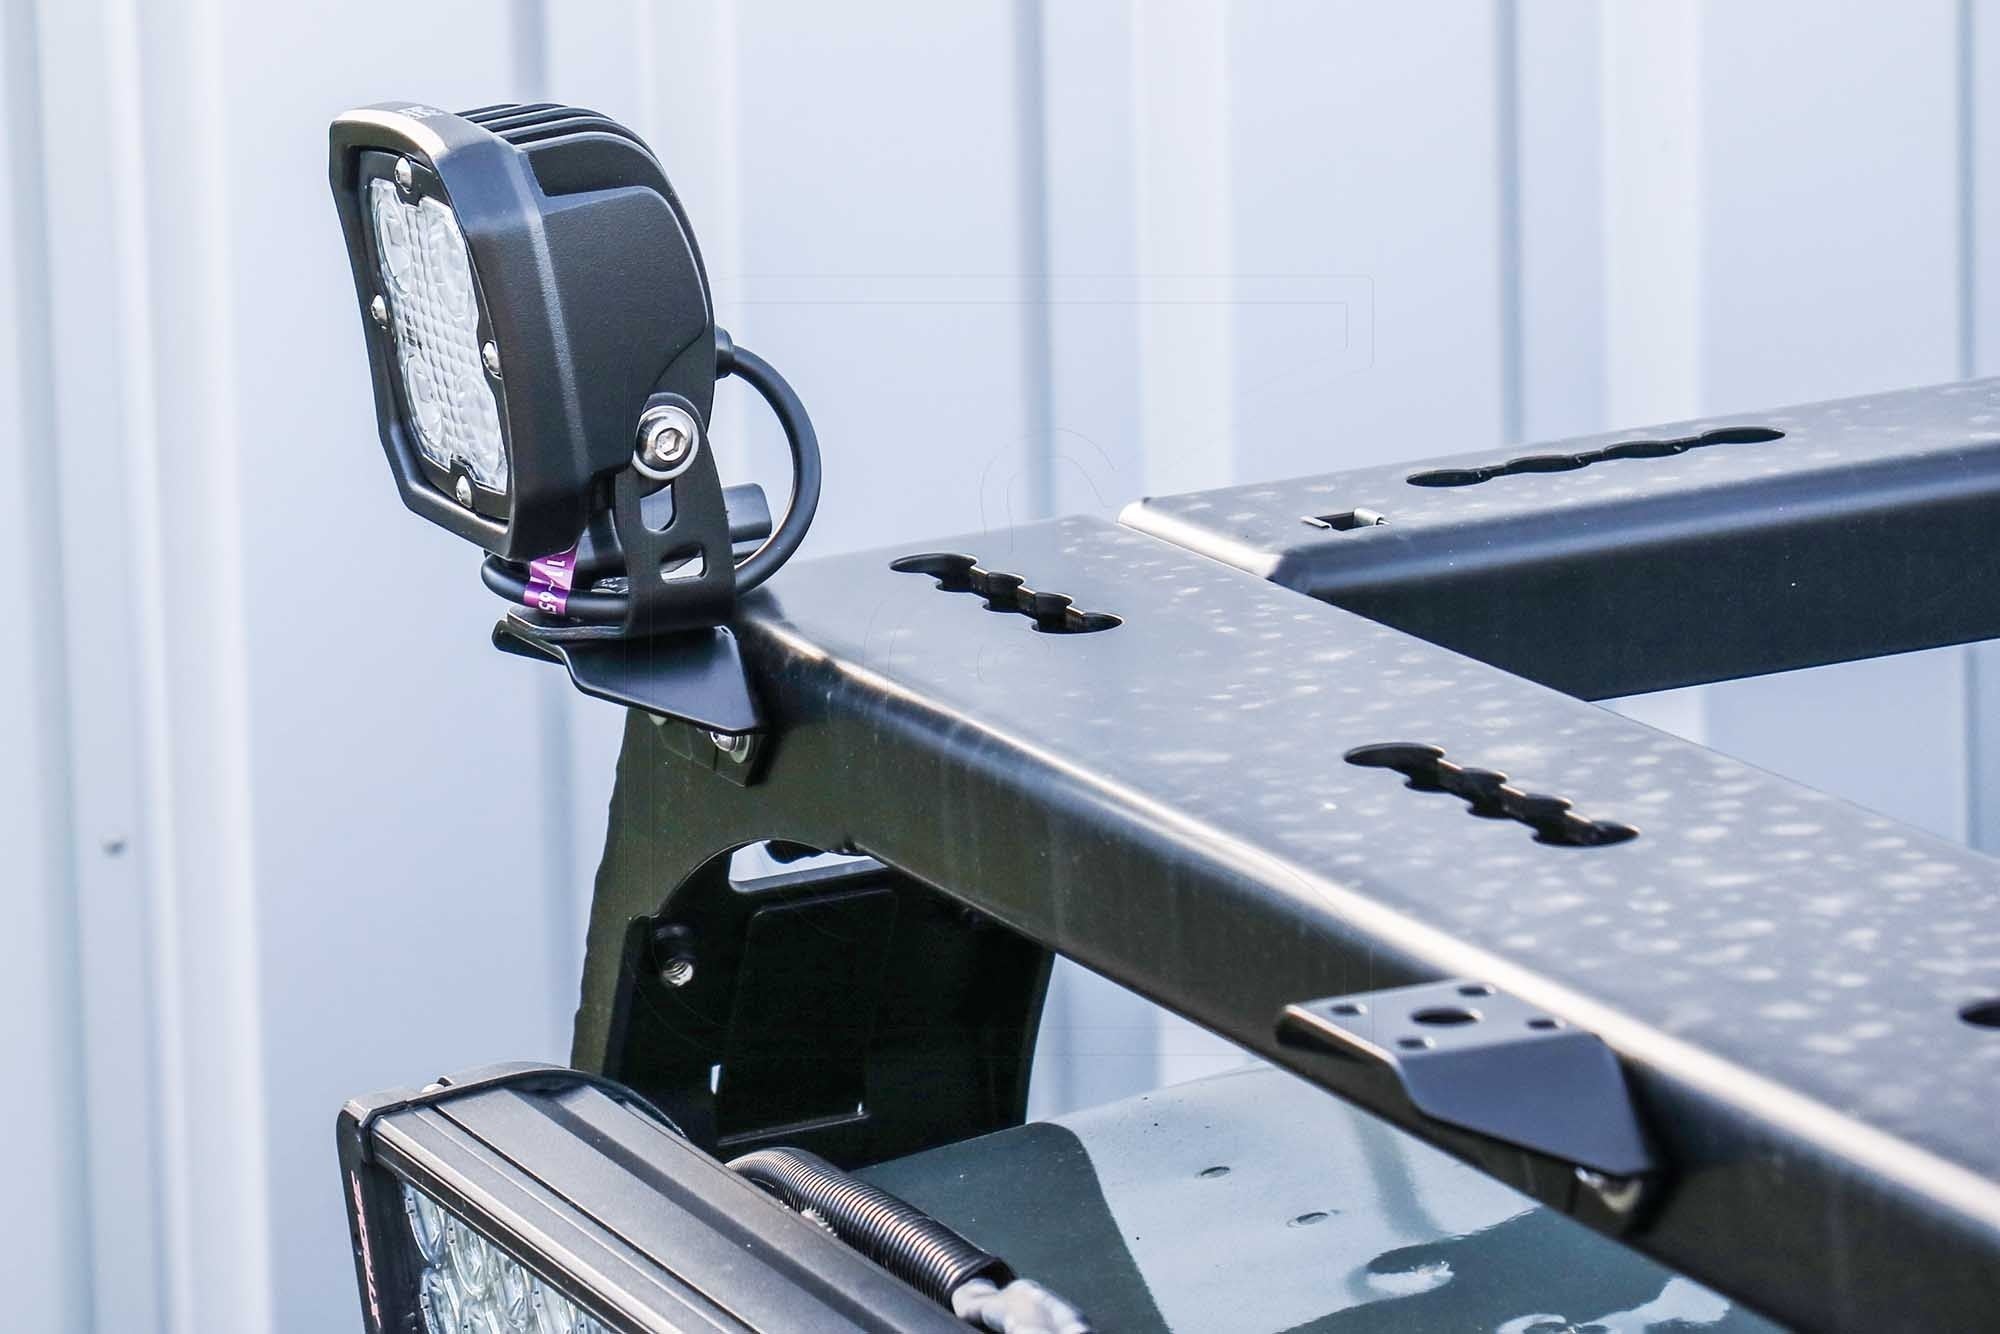 CargoBear Roof Rack - Bracket for 'Connector Bar' or smaller worklights (EACH BRACKET SOLD INDIVIDUALLY)